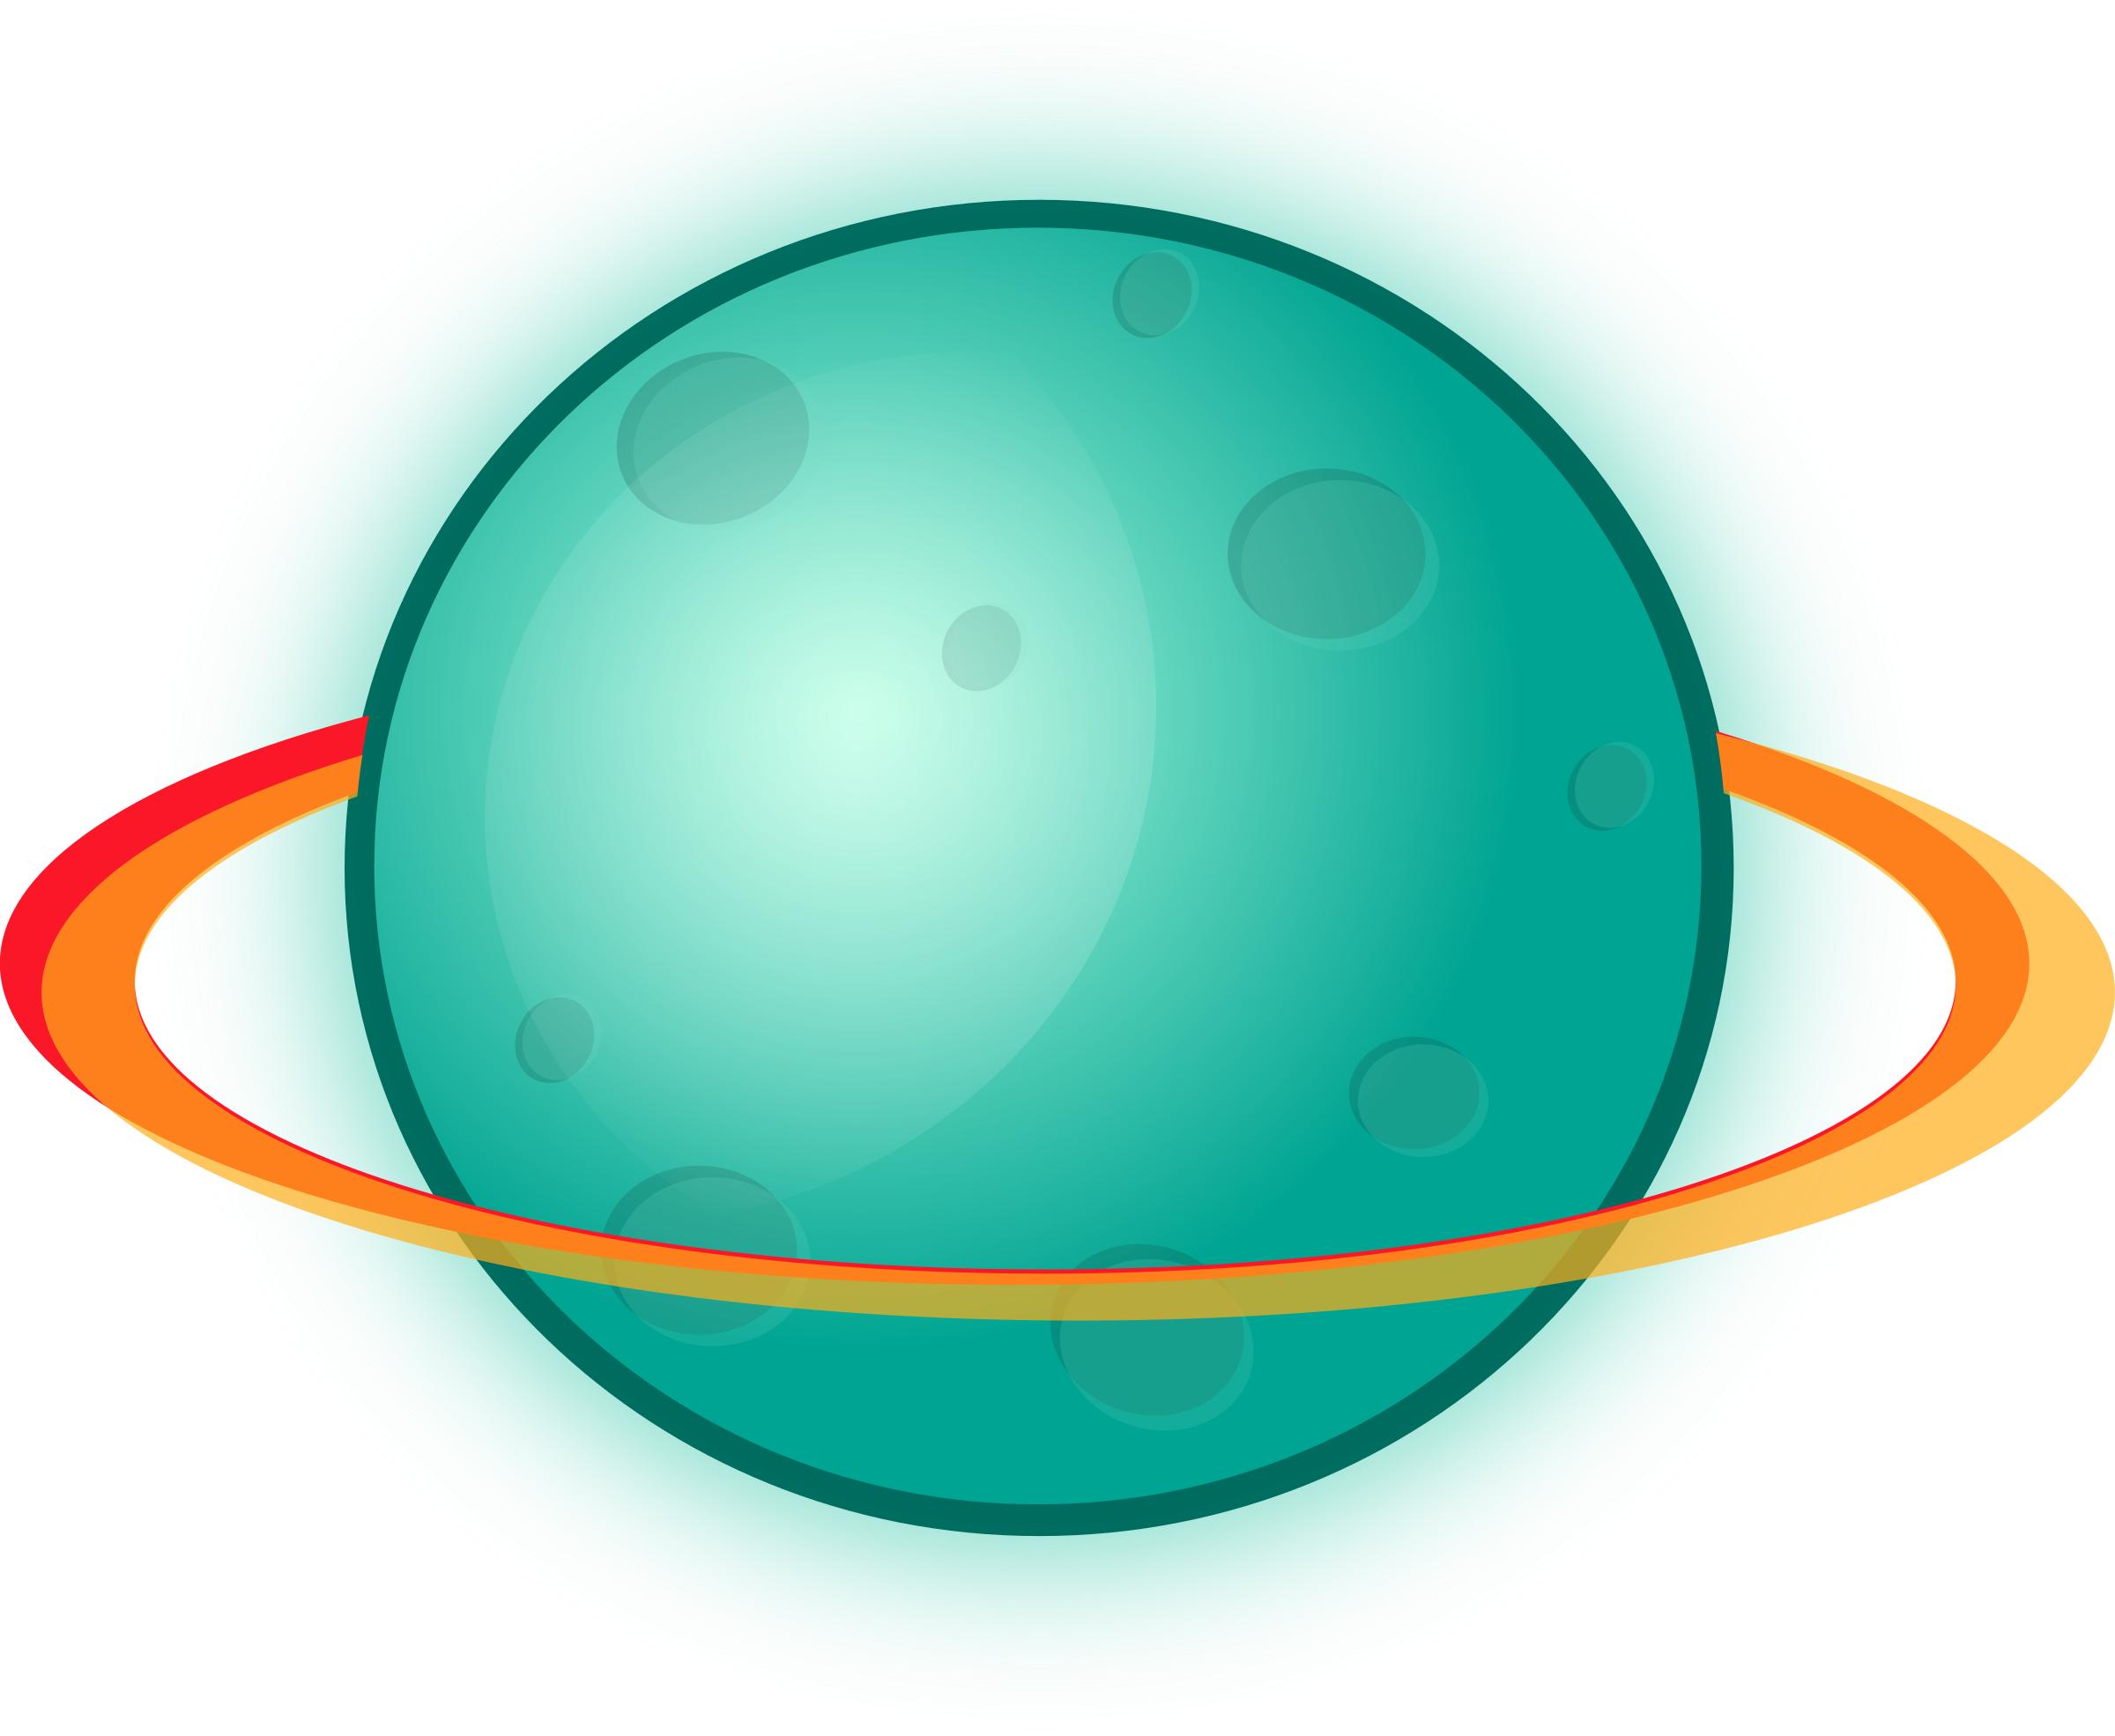 Planet with Rings png